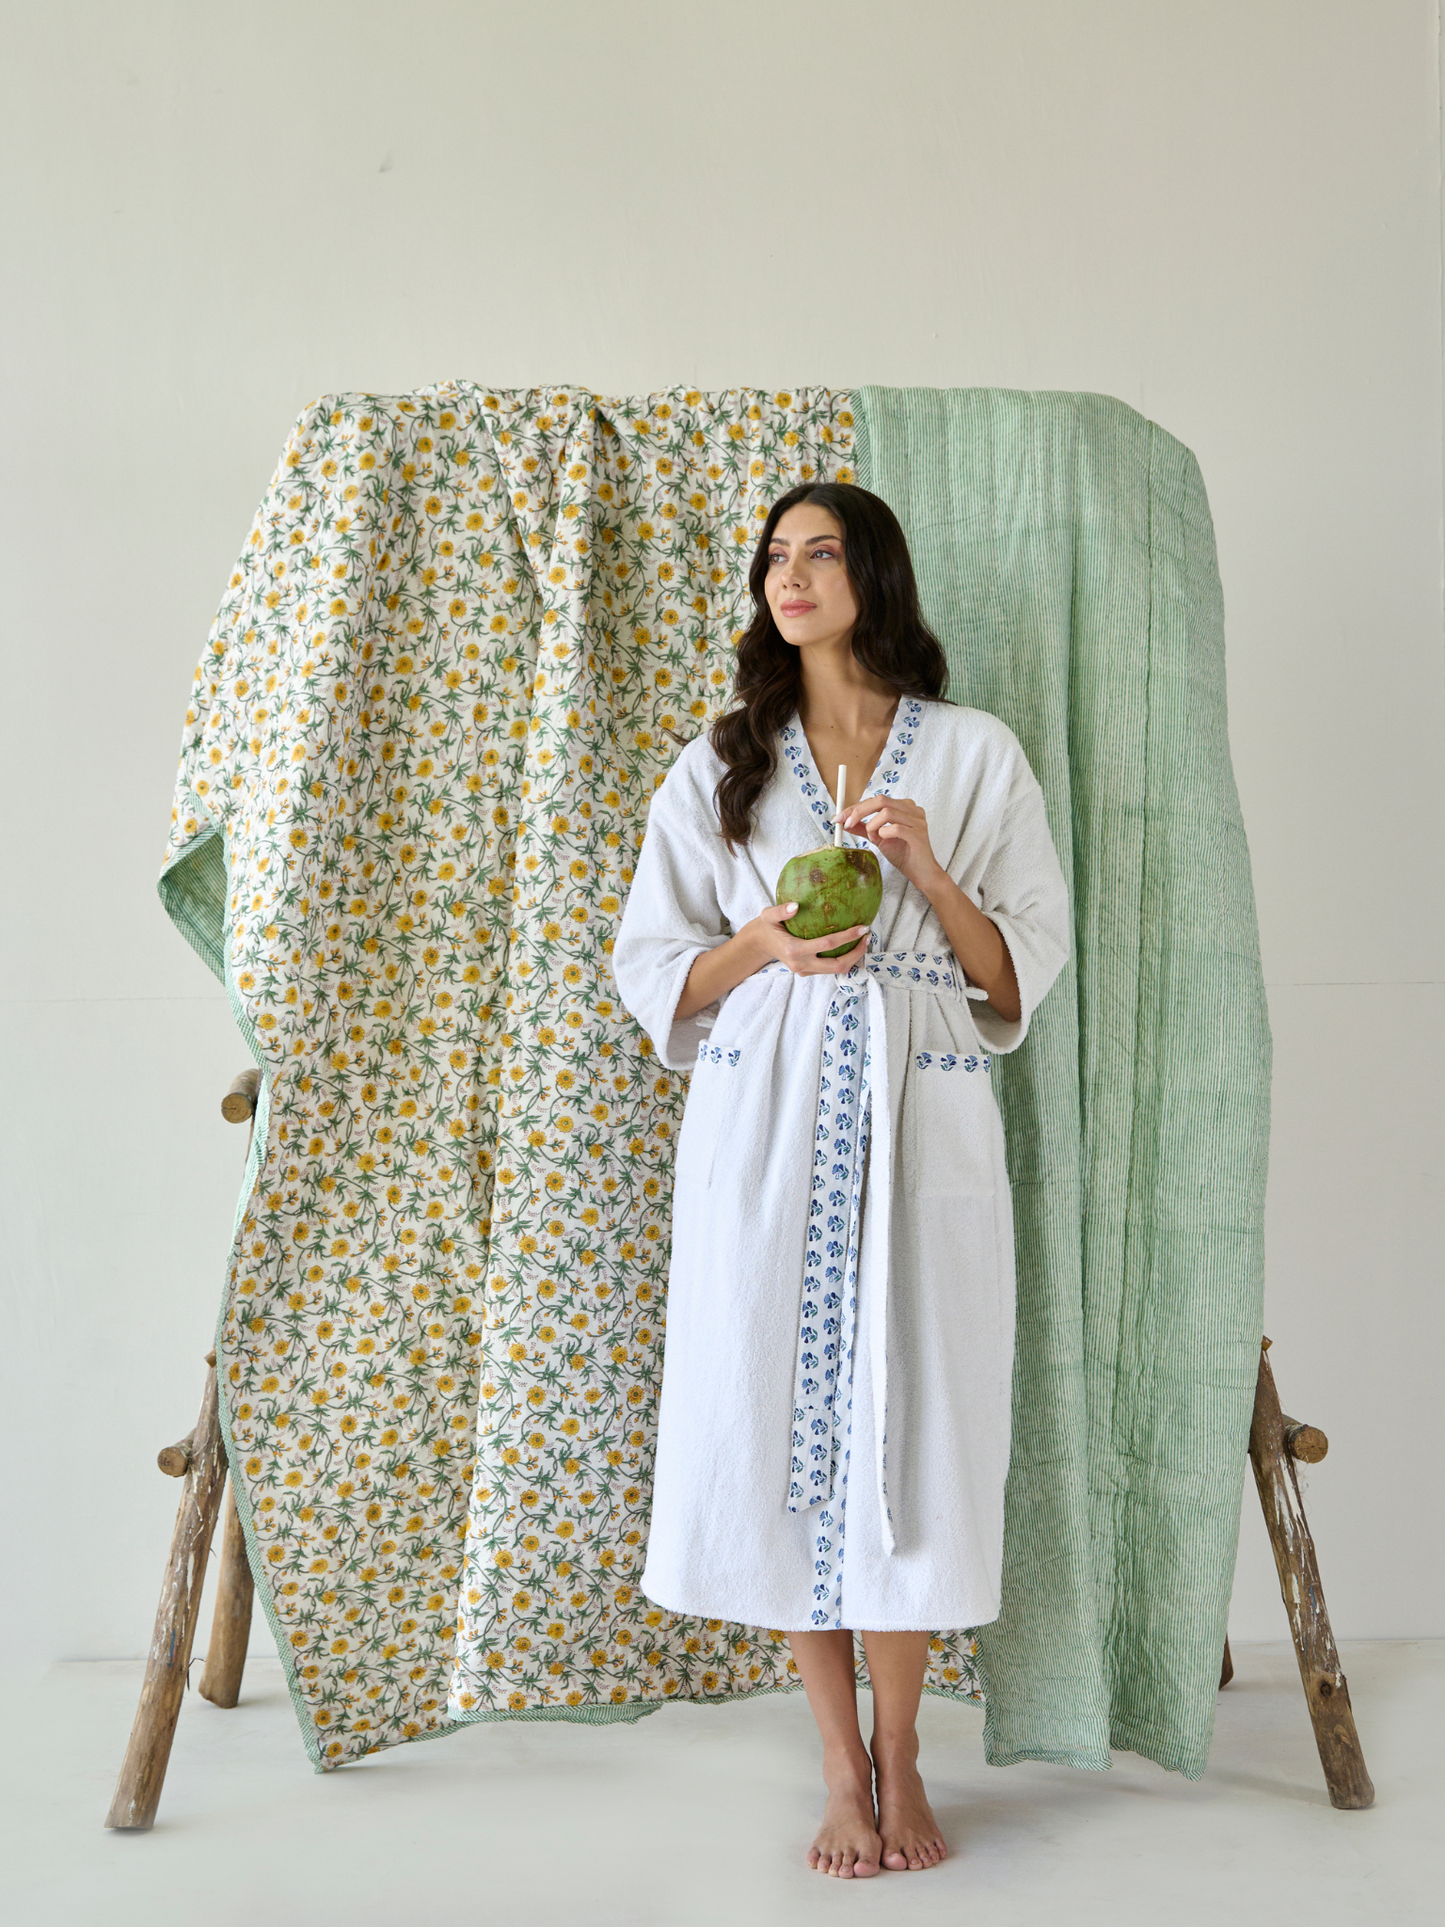 Women's Pale Cyan Blue, Bright Turquoise Cashmere Silk Dressing Gown, Bath  Robe, Holiday, Loungewear, Luxury, Plus Size, Petite, Bespoke - Etsy | Silk dressing  gown, Gowns dresses, Bridal robes